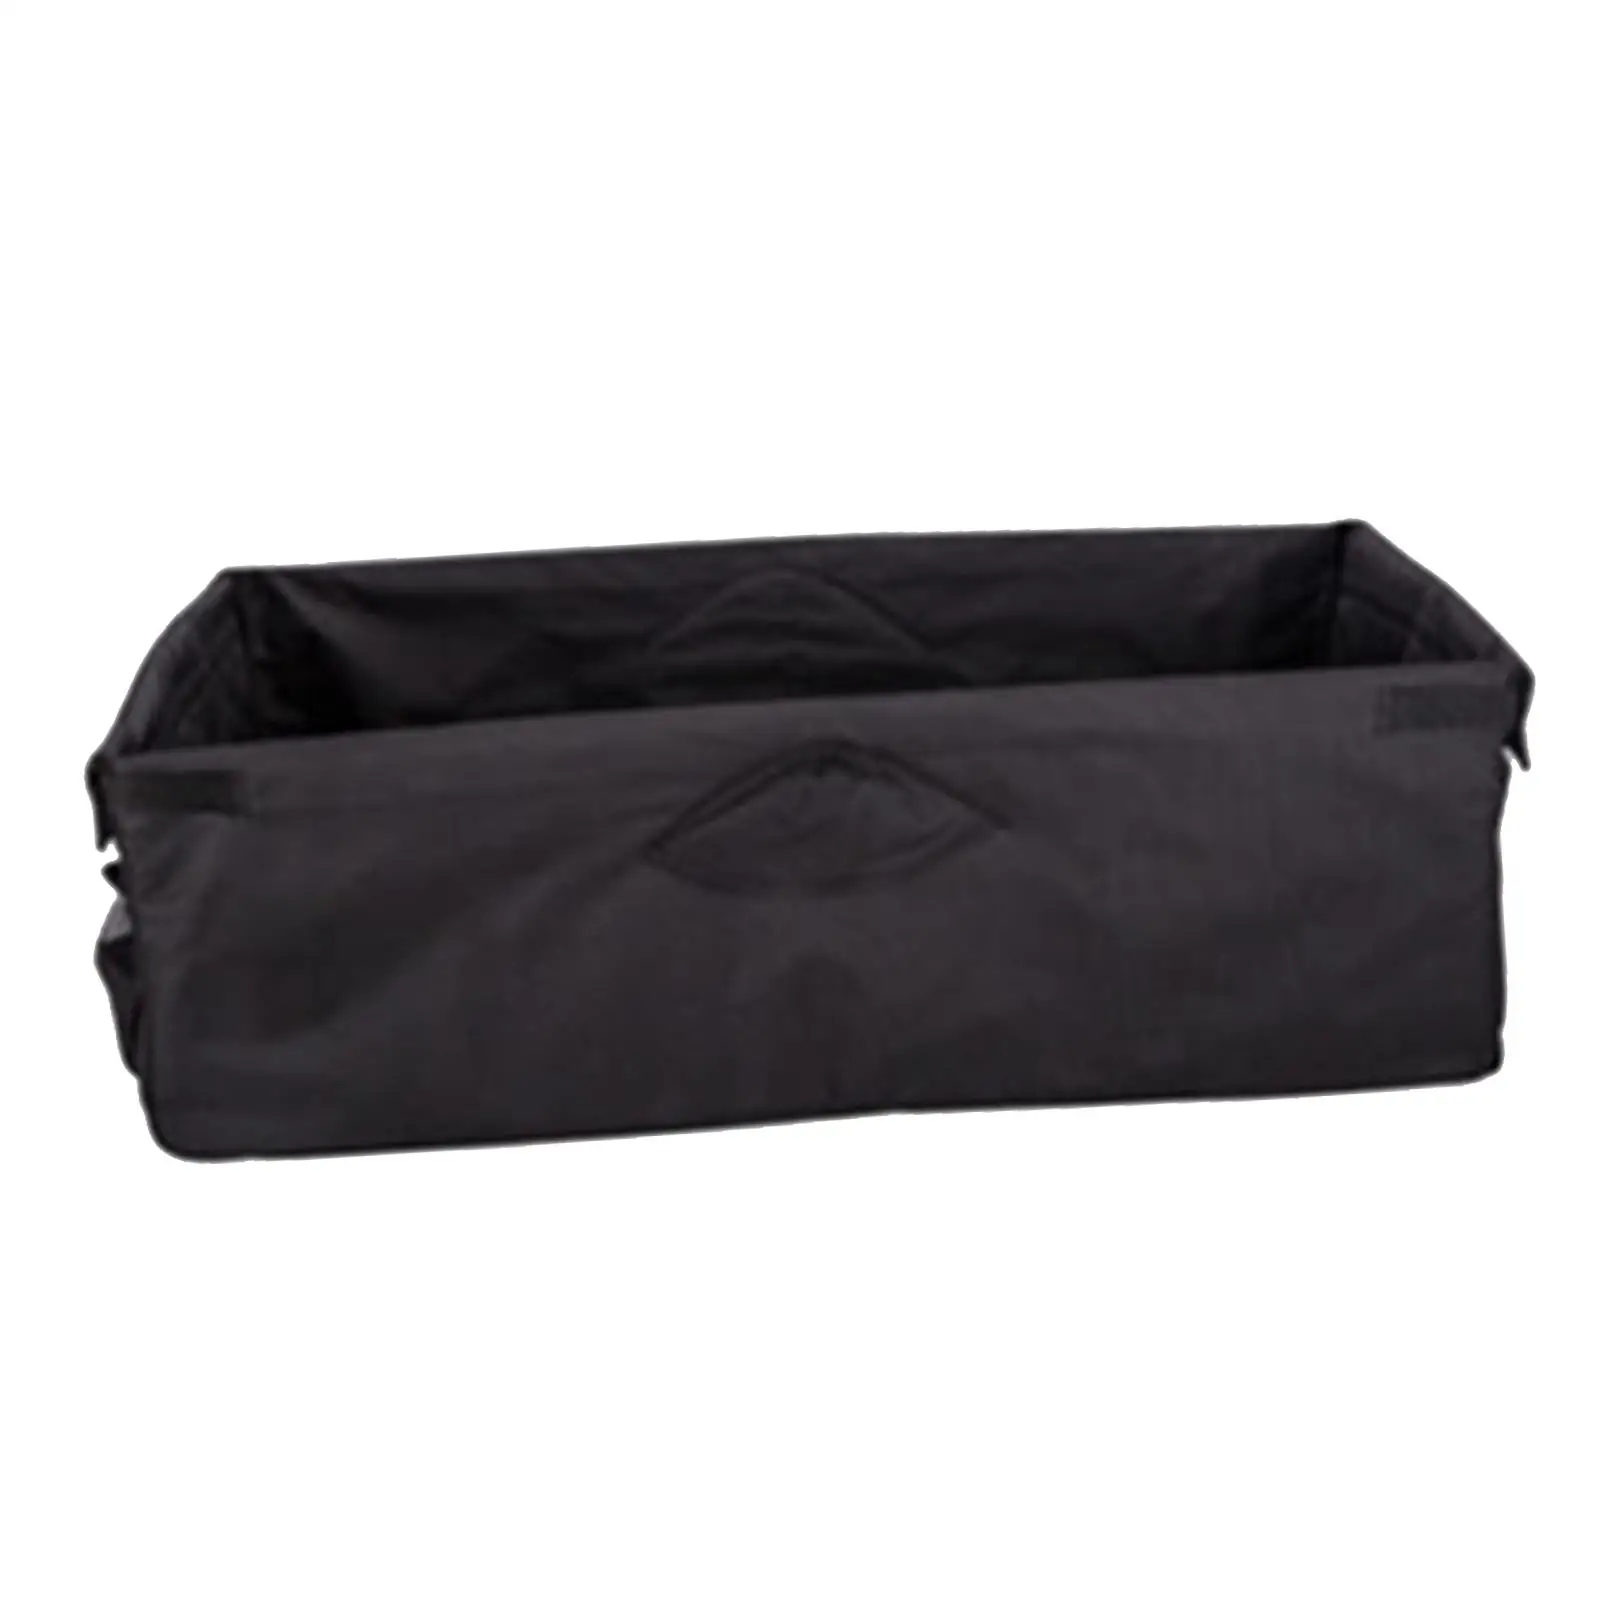 Outdoor Wagon Liner, Trolley Cart Removable Oxford Cloth Liner, for